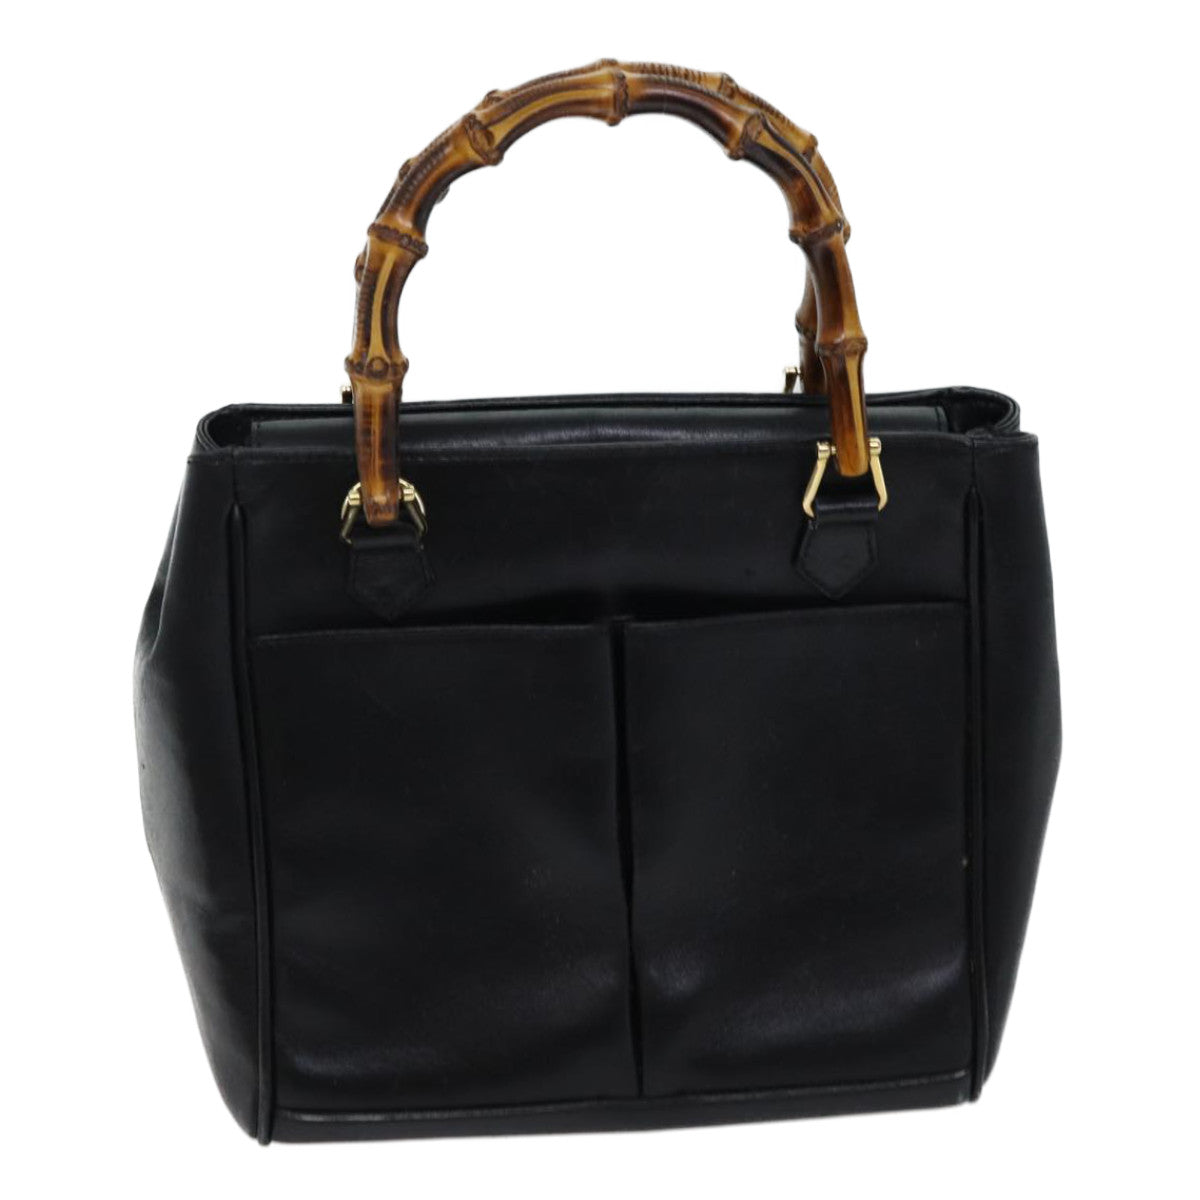 GUCCI Bamboo Hand Bag Leather 2way Black 000 122 0316 Auth 69772